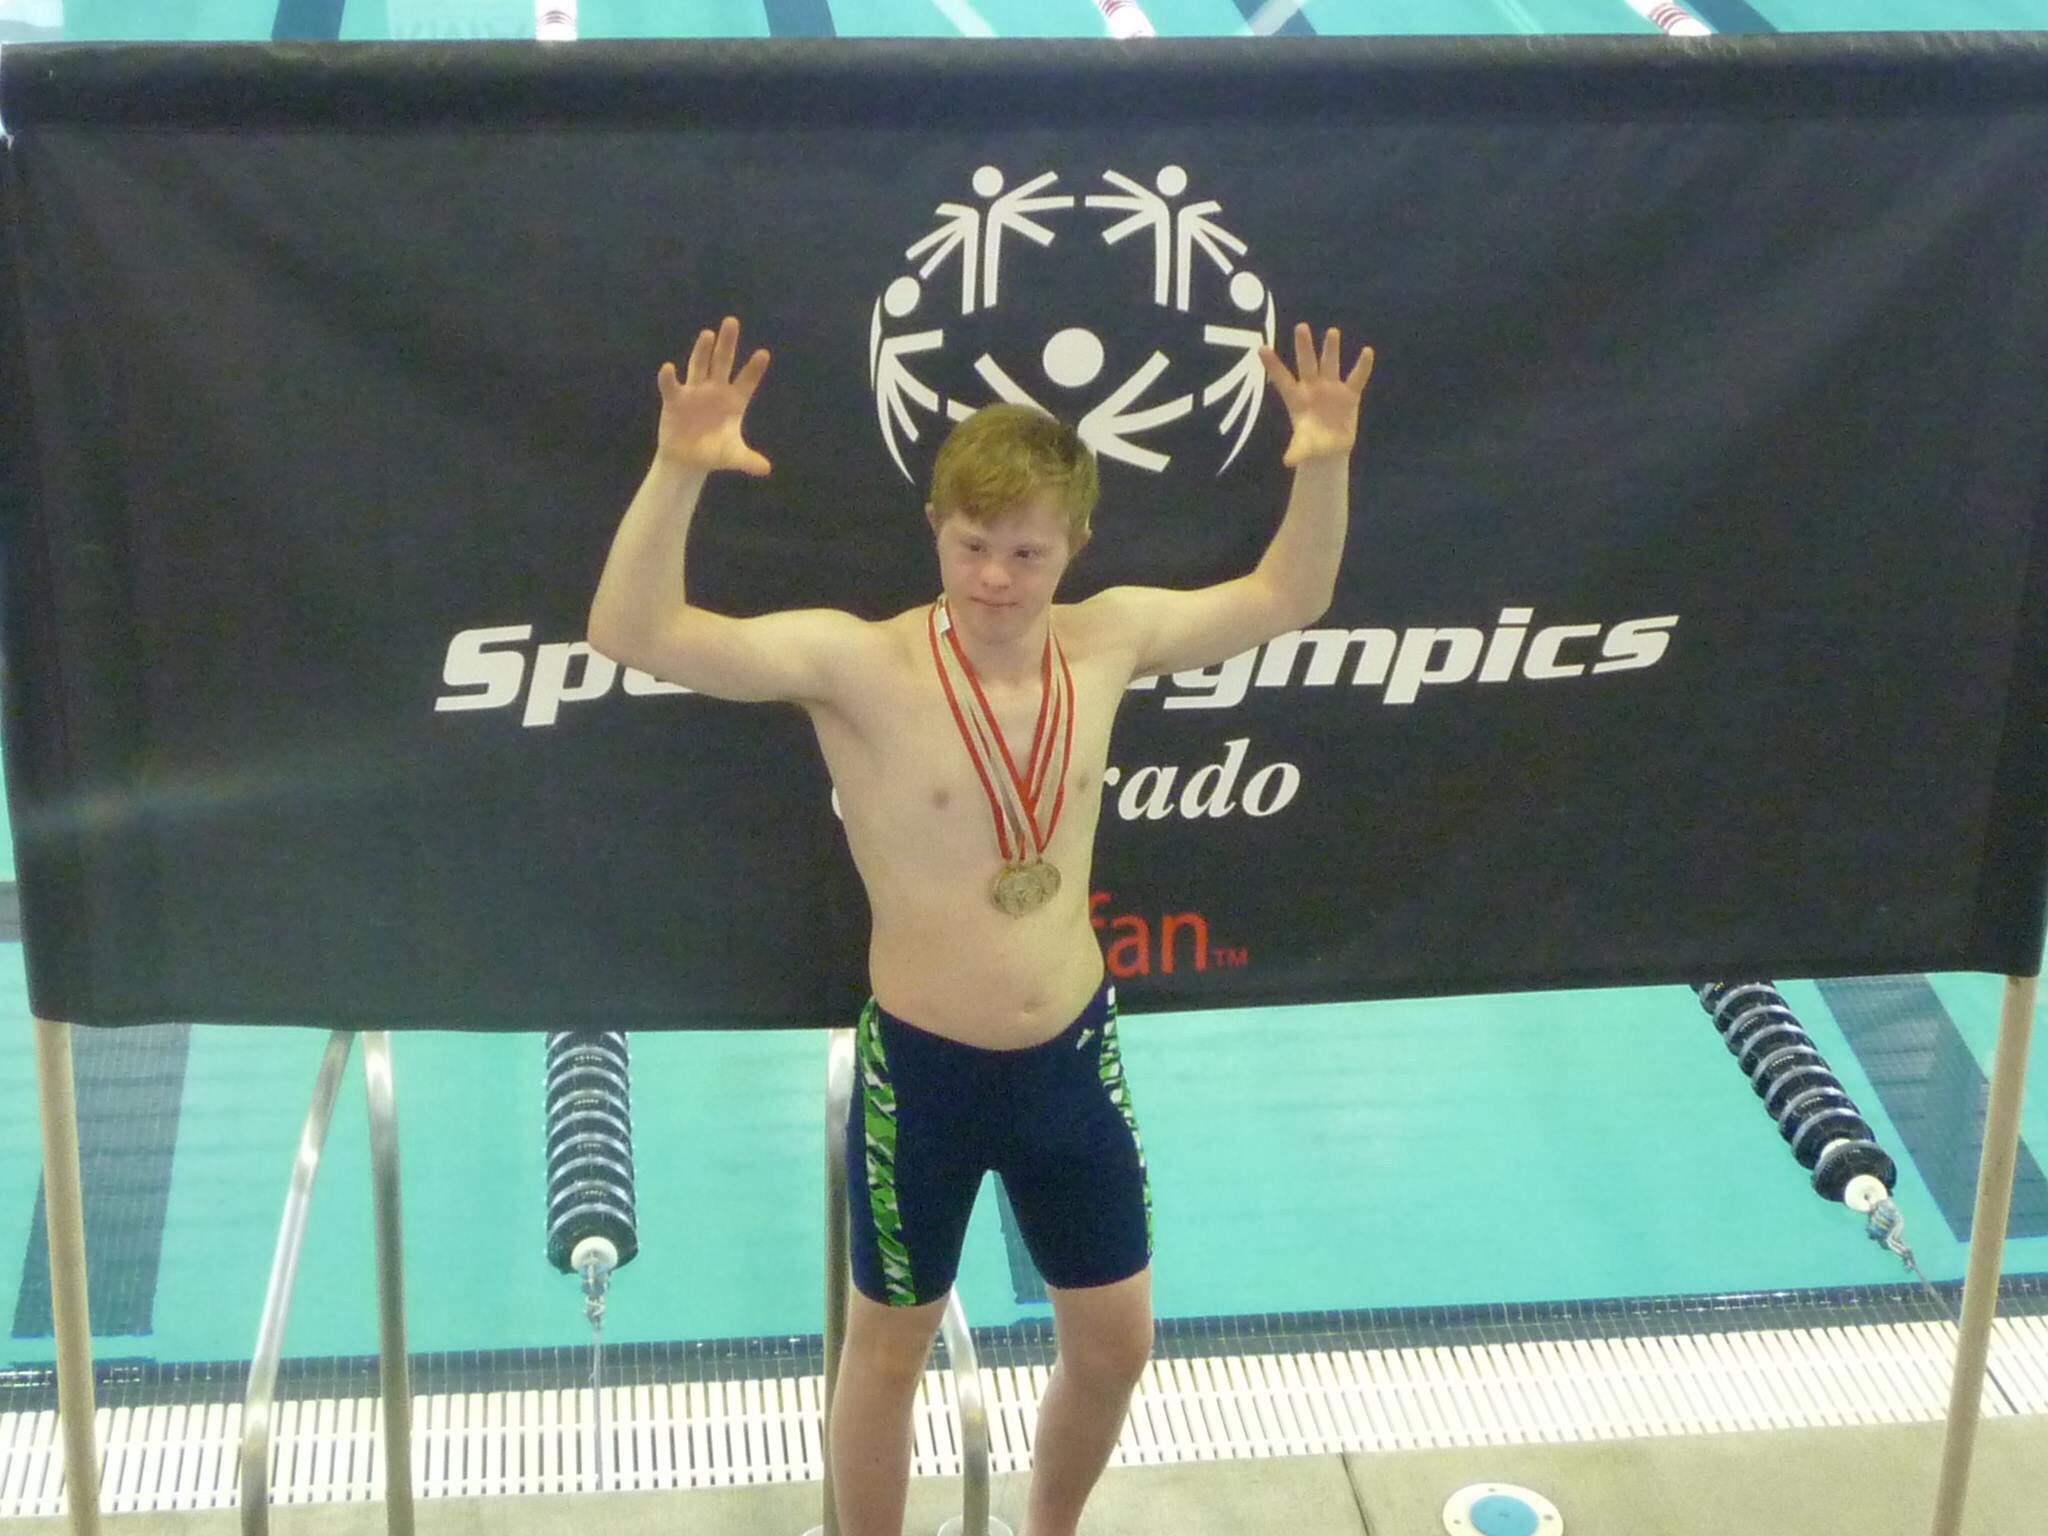 Three for three! Fastest event times for 50m Fly, Free & Back, 2014 SOColorado State Aquatics Games.